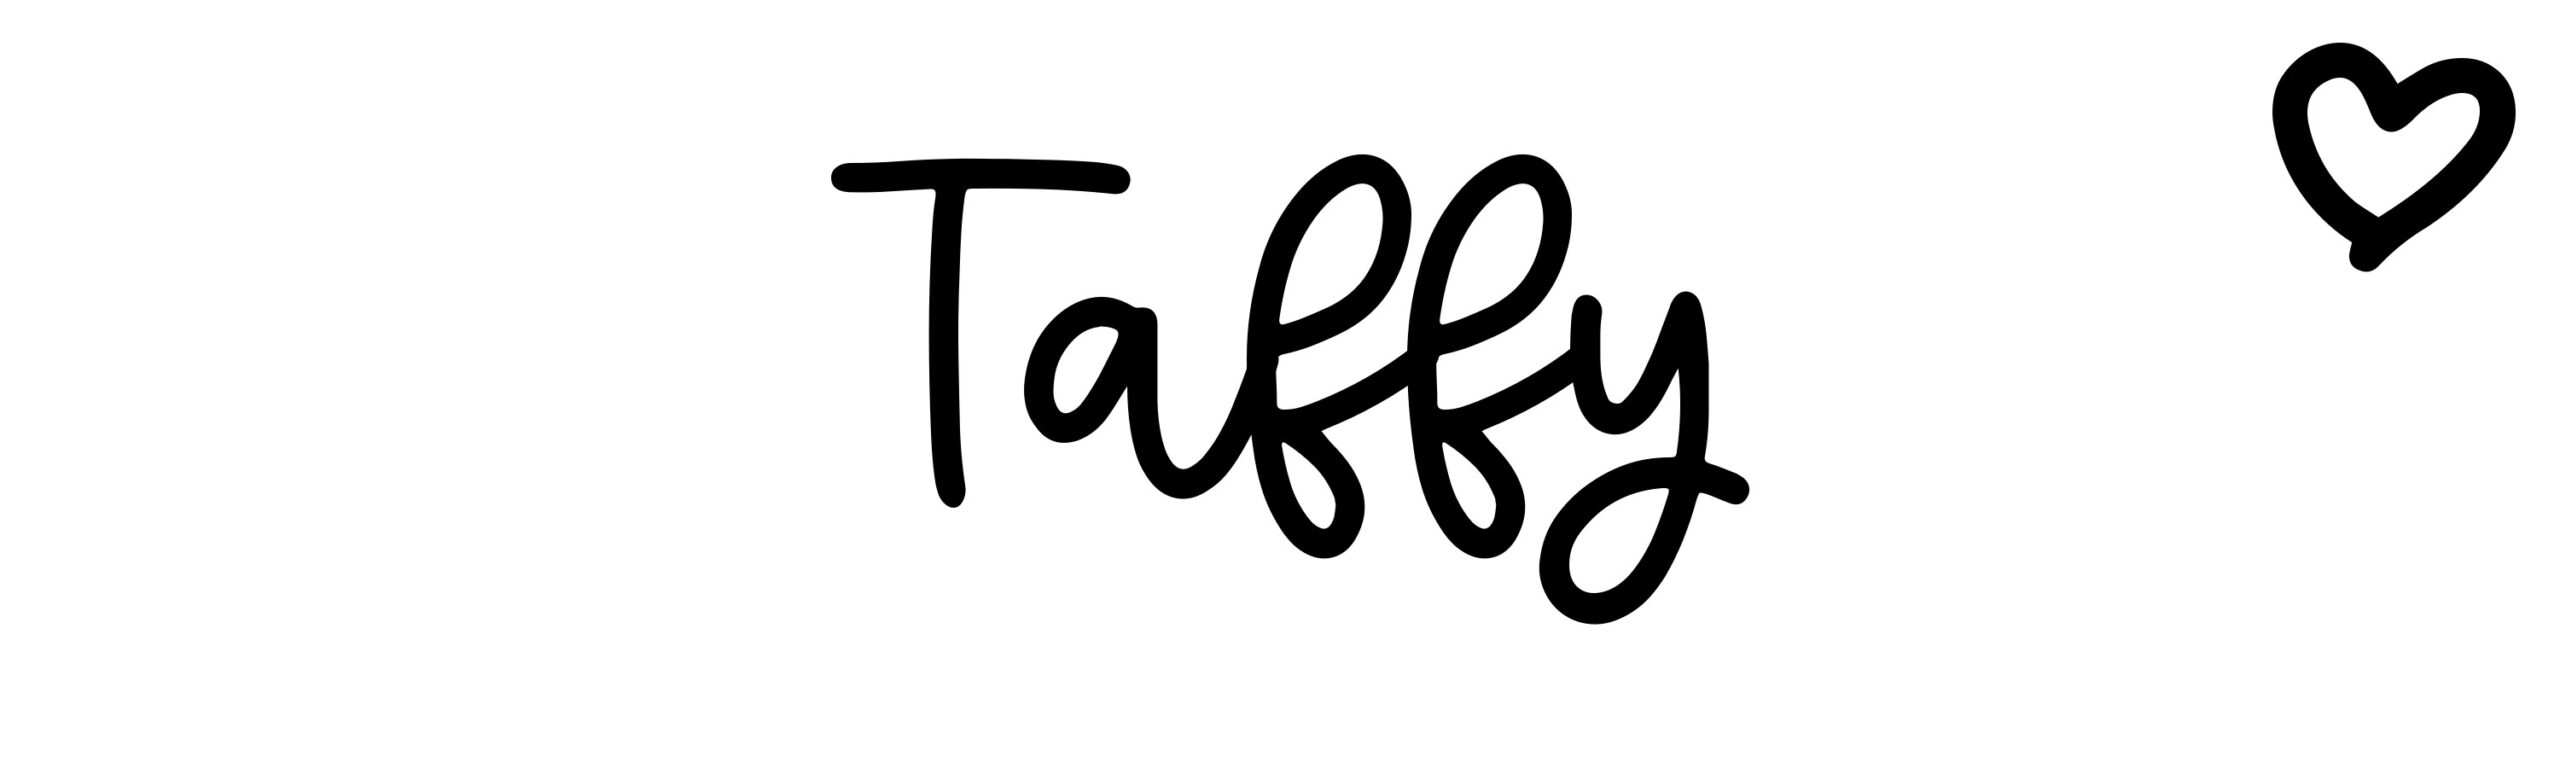 Taffy - Name meaning, origin, variations and more